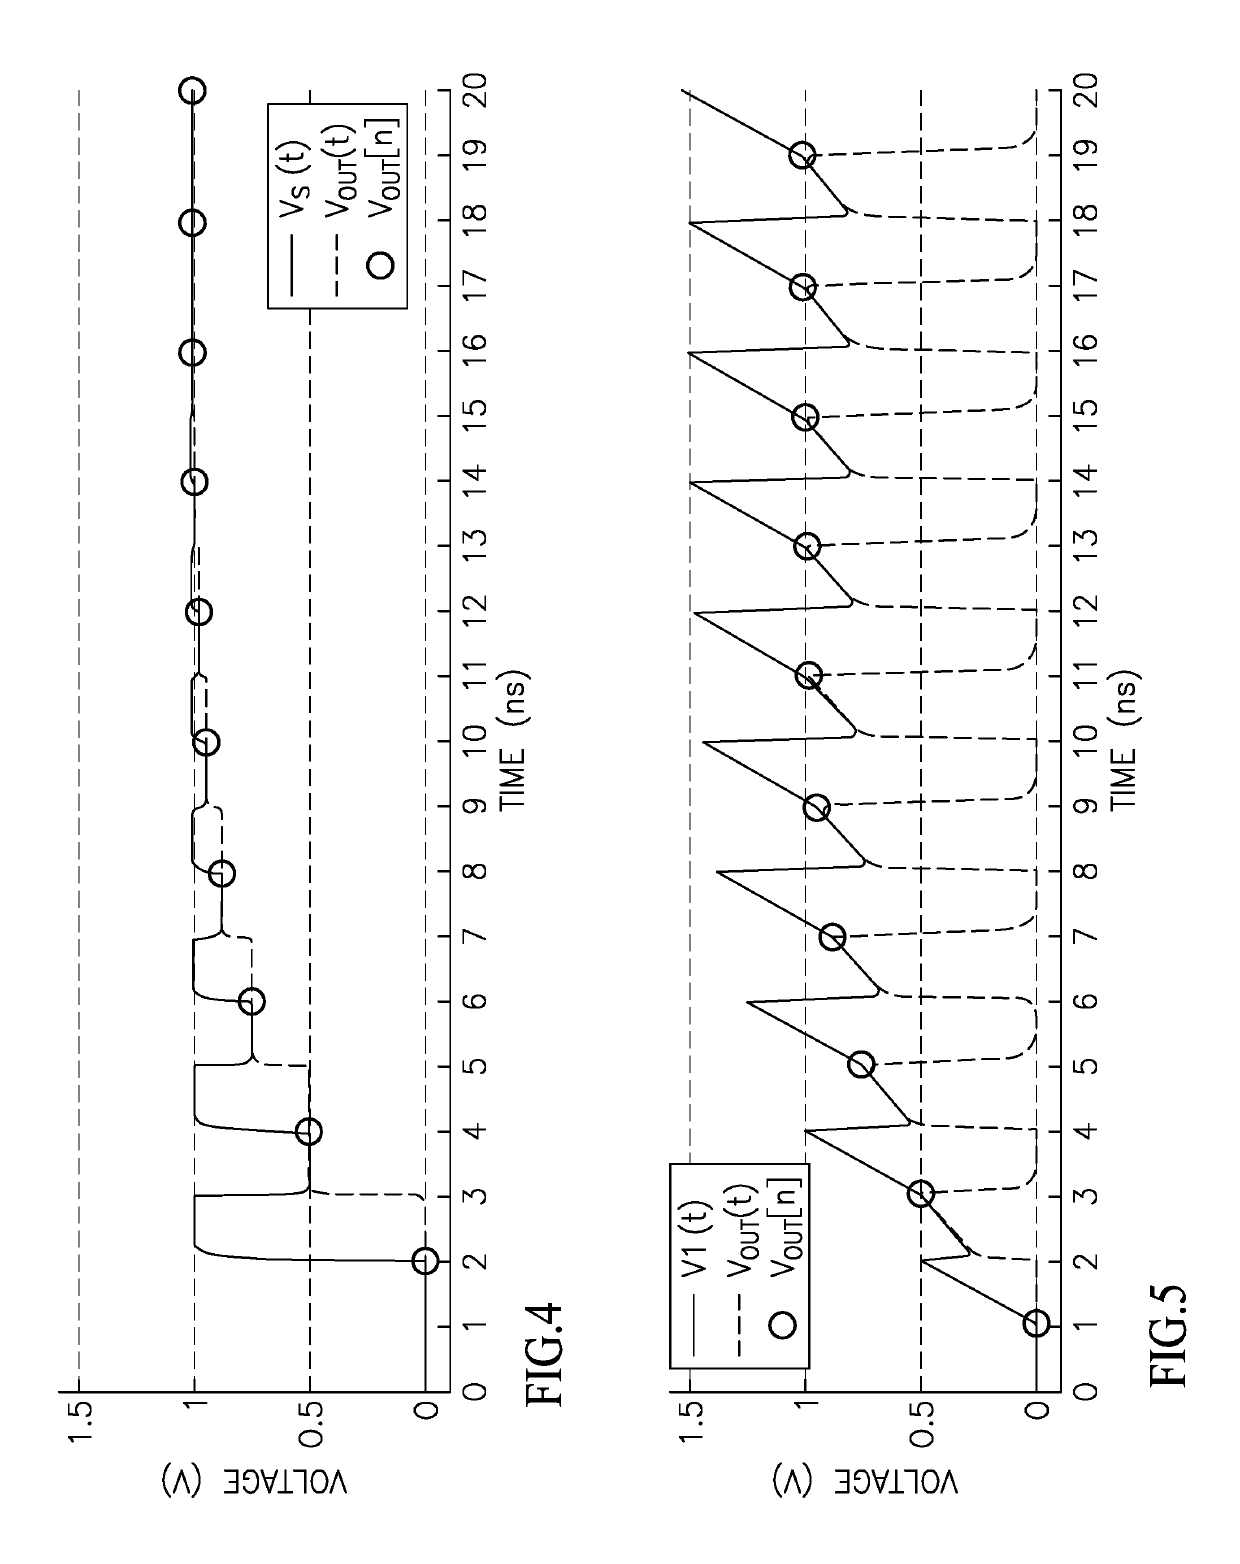 Discrete Time IIR Filter With High Stop Band Rejection